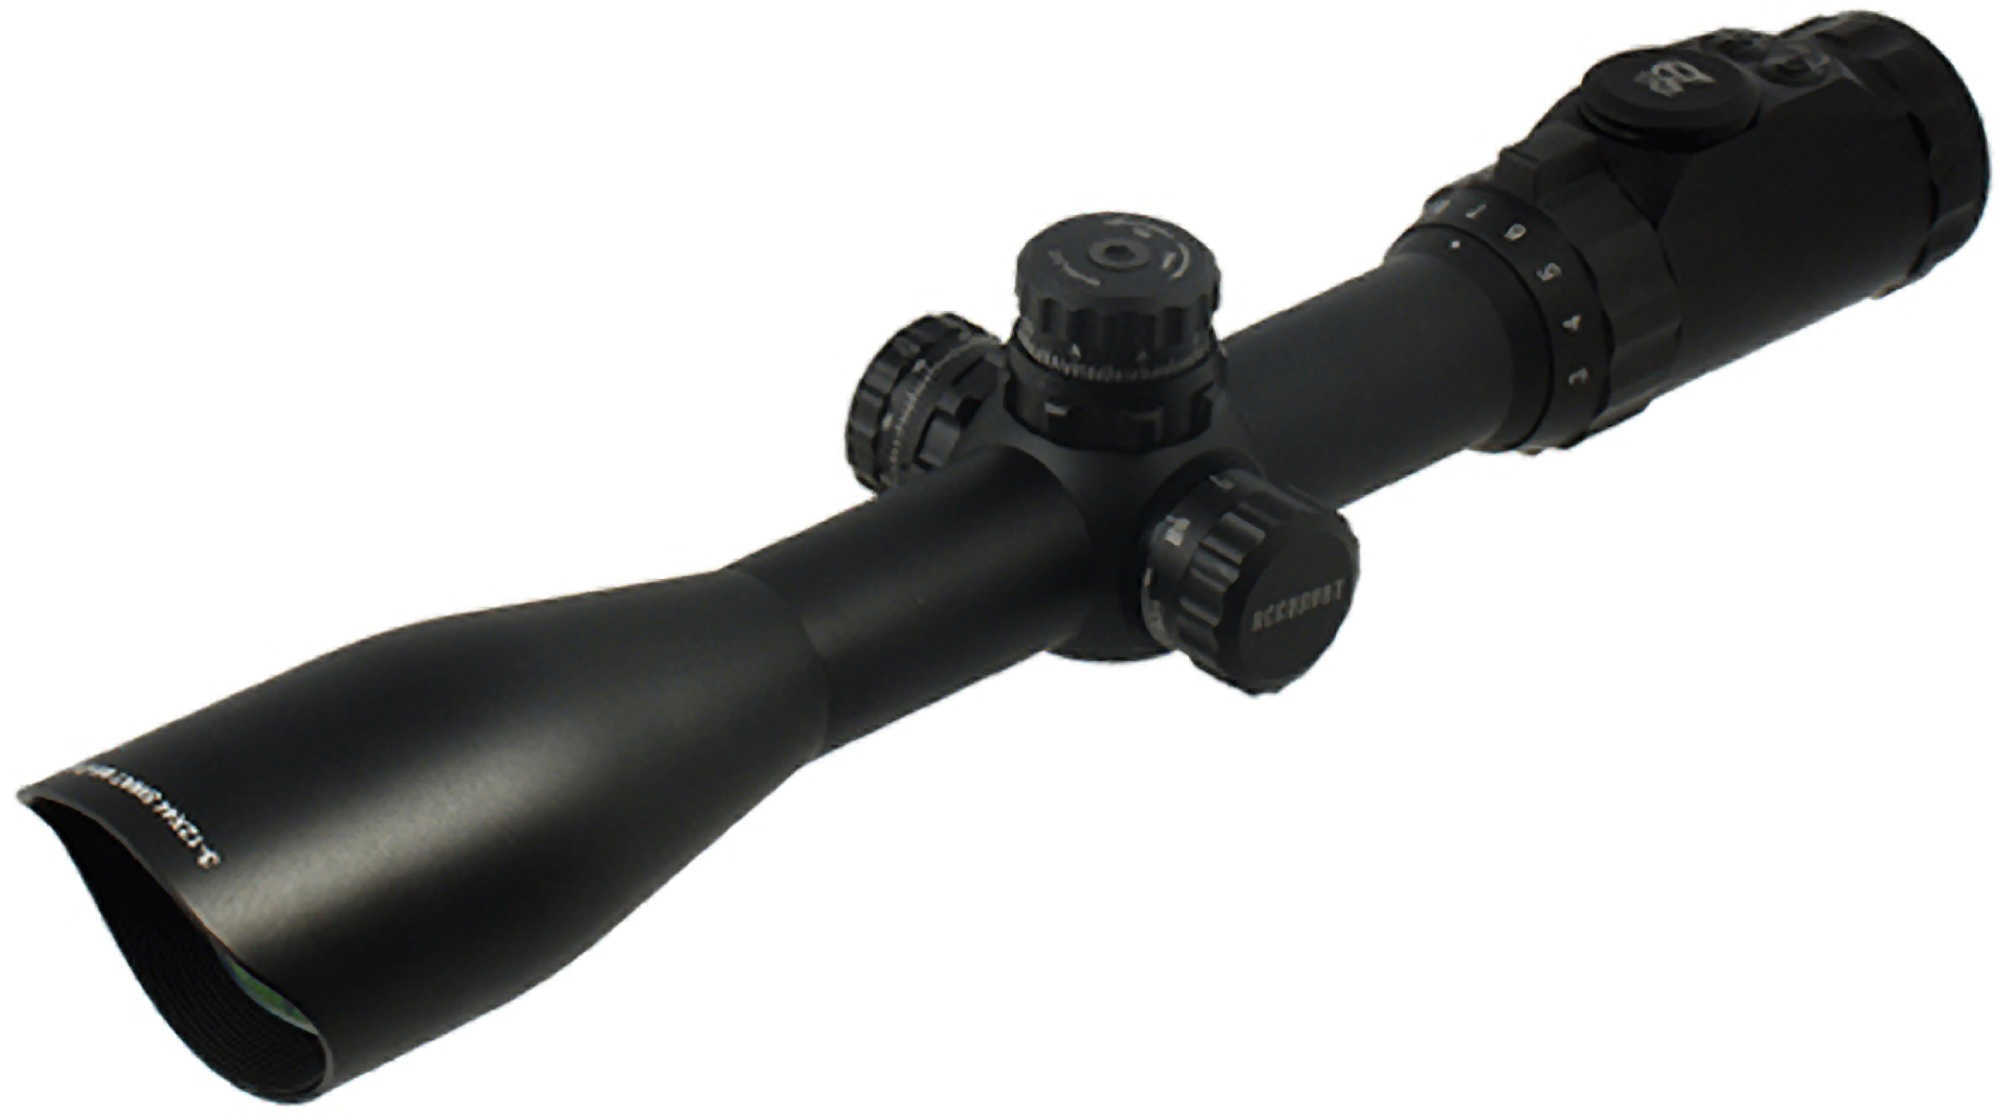 Leapers Inc. - UTG Accushot Precision Series Rifle Scope 3-12X44 Illuminated Mil-Dot Reticle Compact Adjustable Objectiv